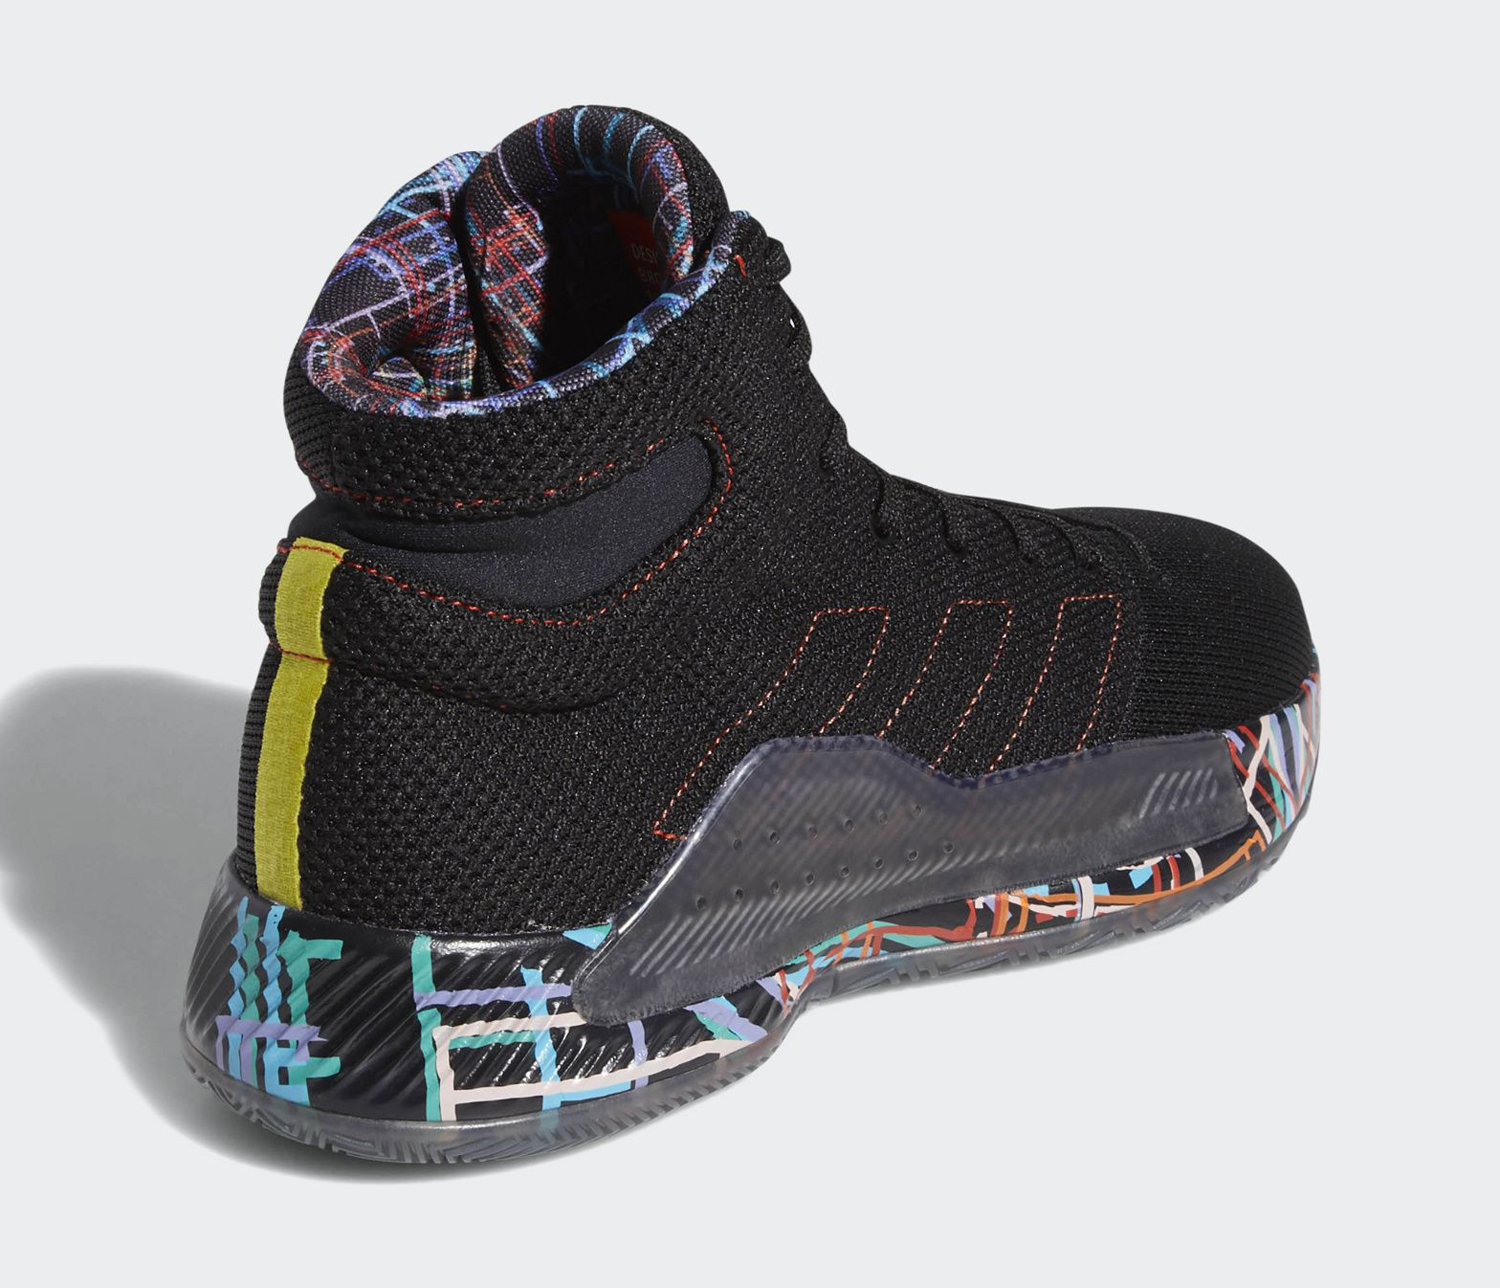 pro bounce madness 2019 shoes review